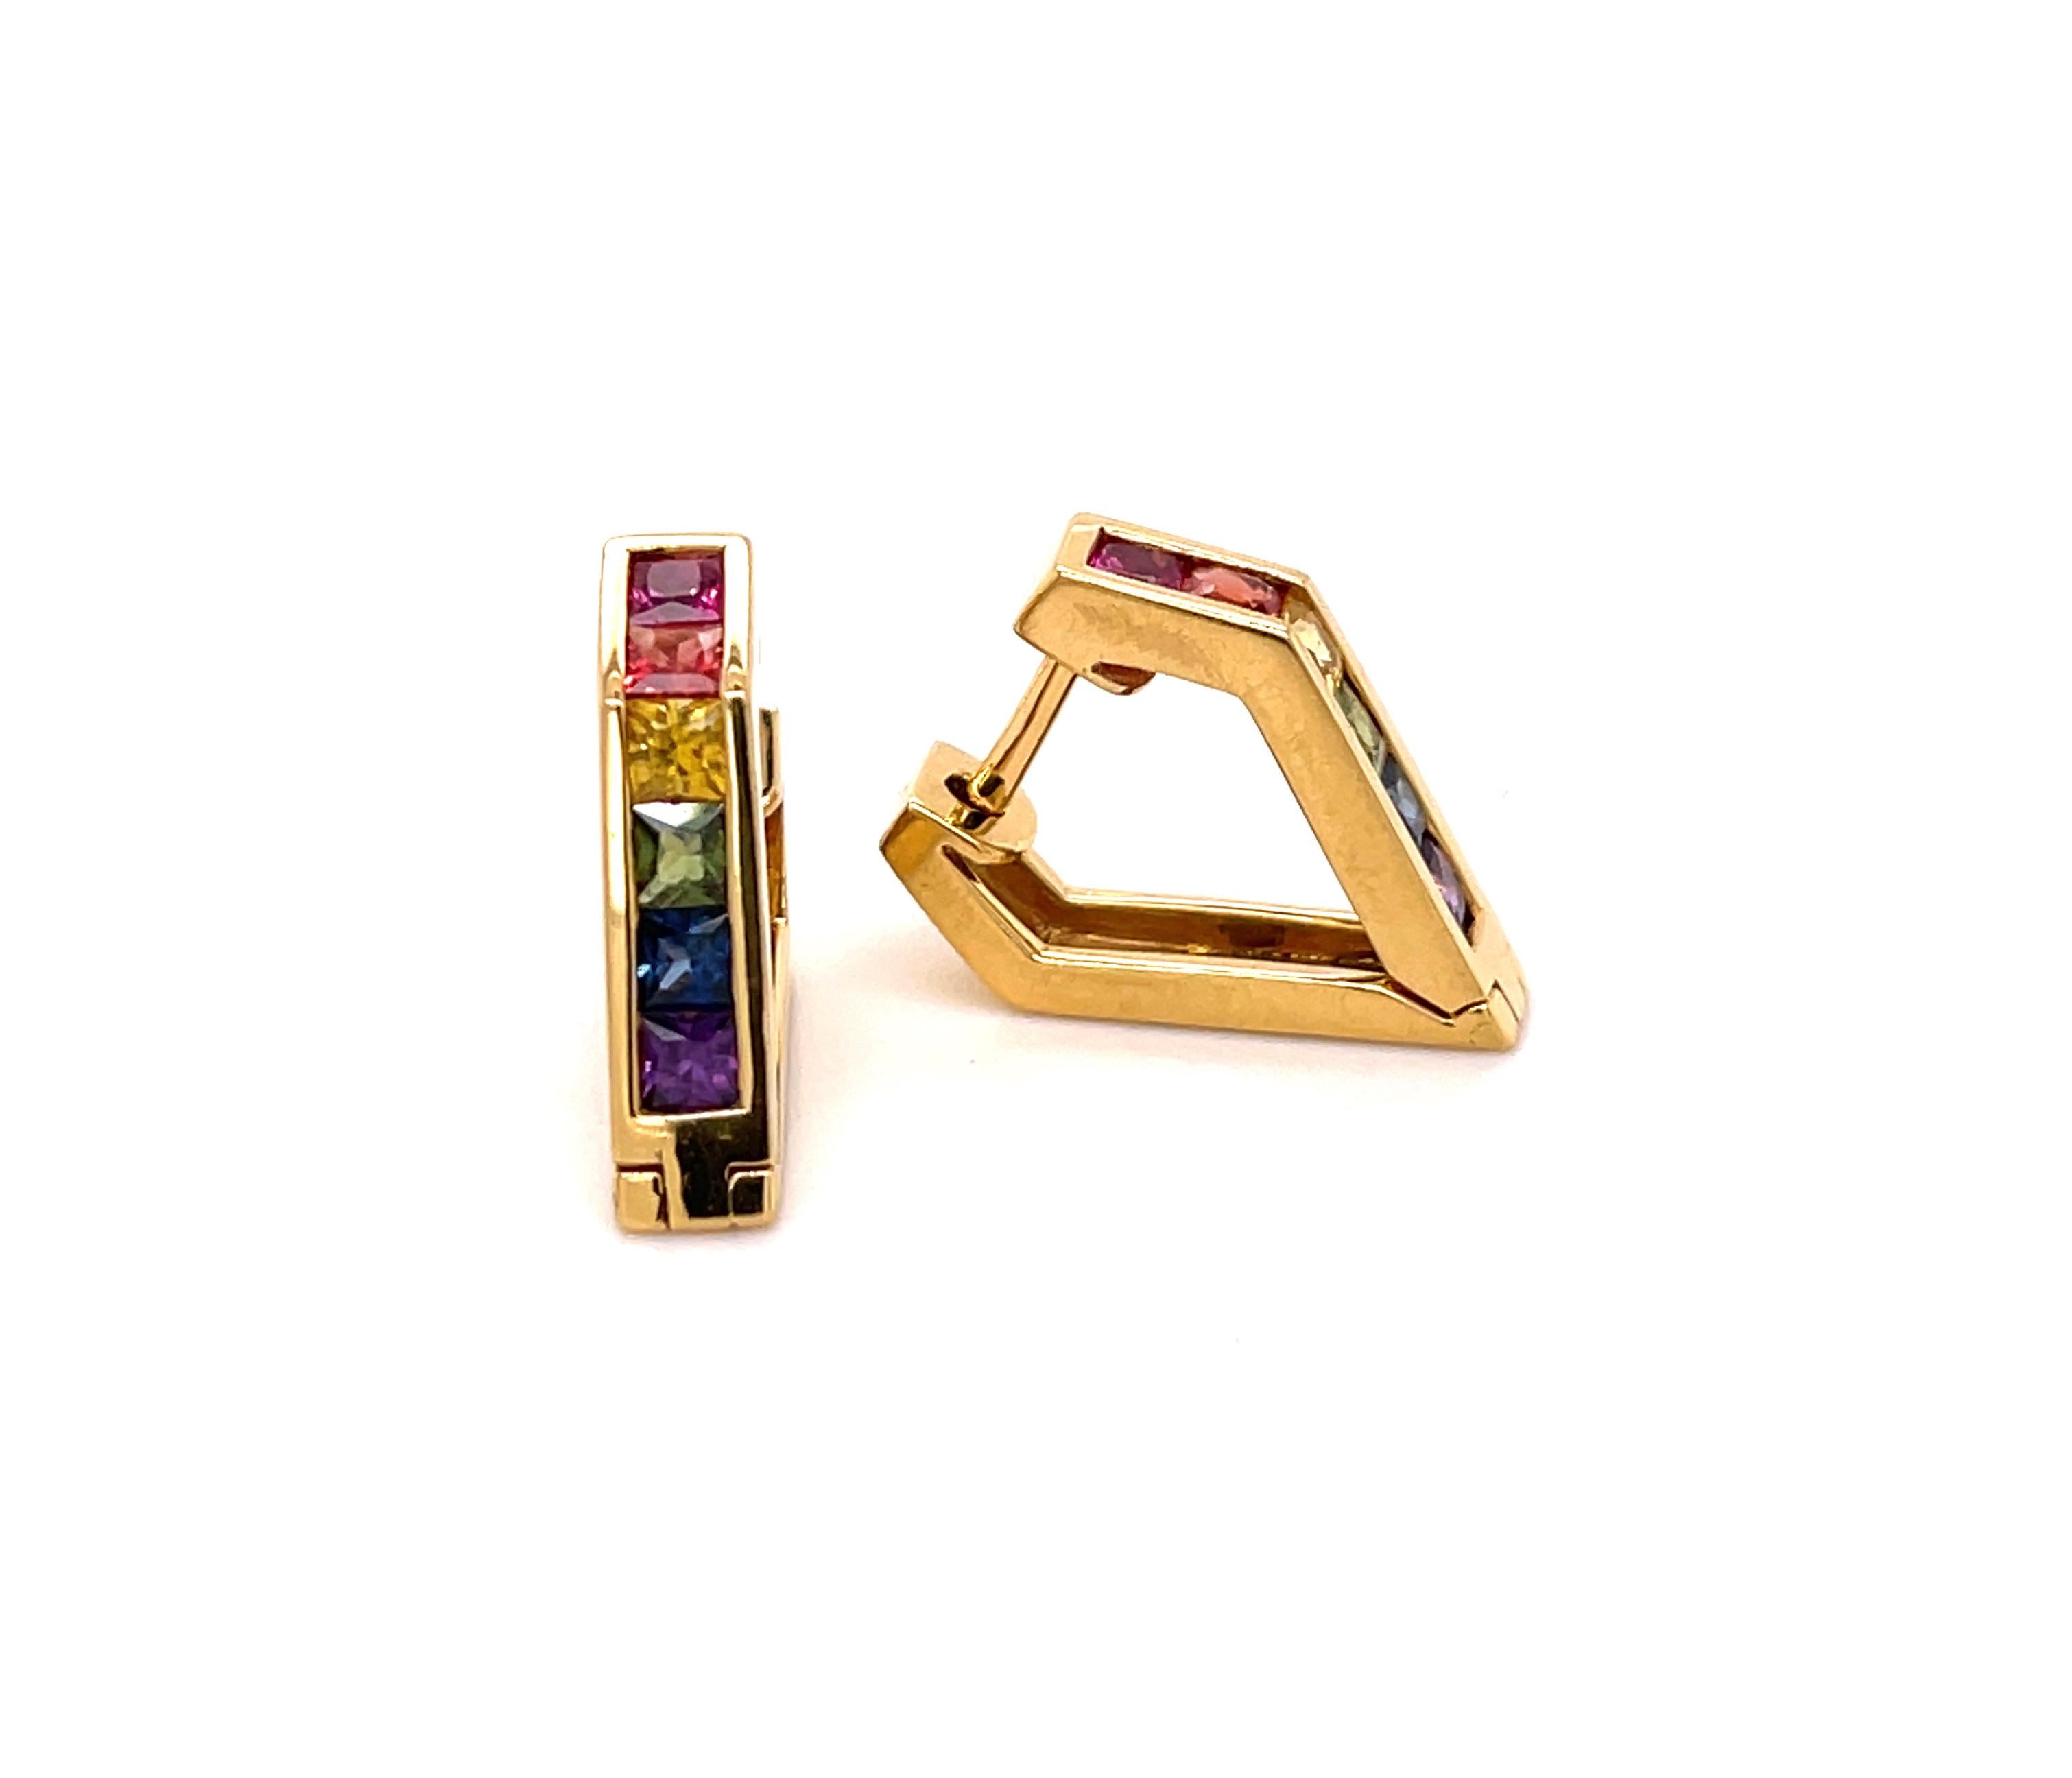 These multi-color Hoop-Earrings have a contemporary shape and they are not the traditional round Huggies. Done in 18-karat yellow gold this pair has a total of 1.25 carats of 12 princess cut 2.5 mm multi-colored Sapphire. The earrings are 15 mm